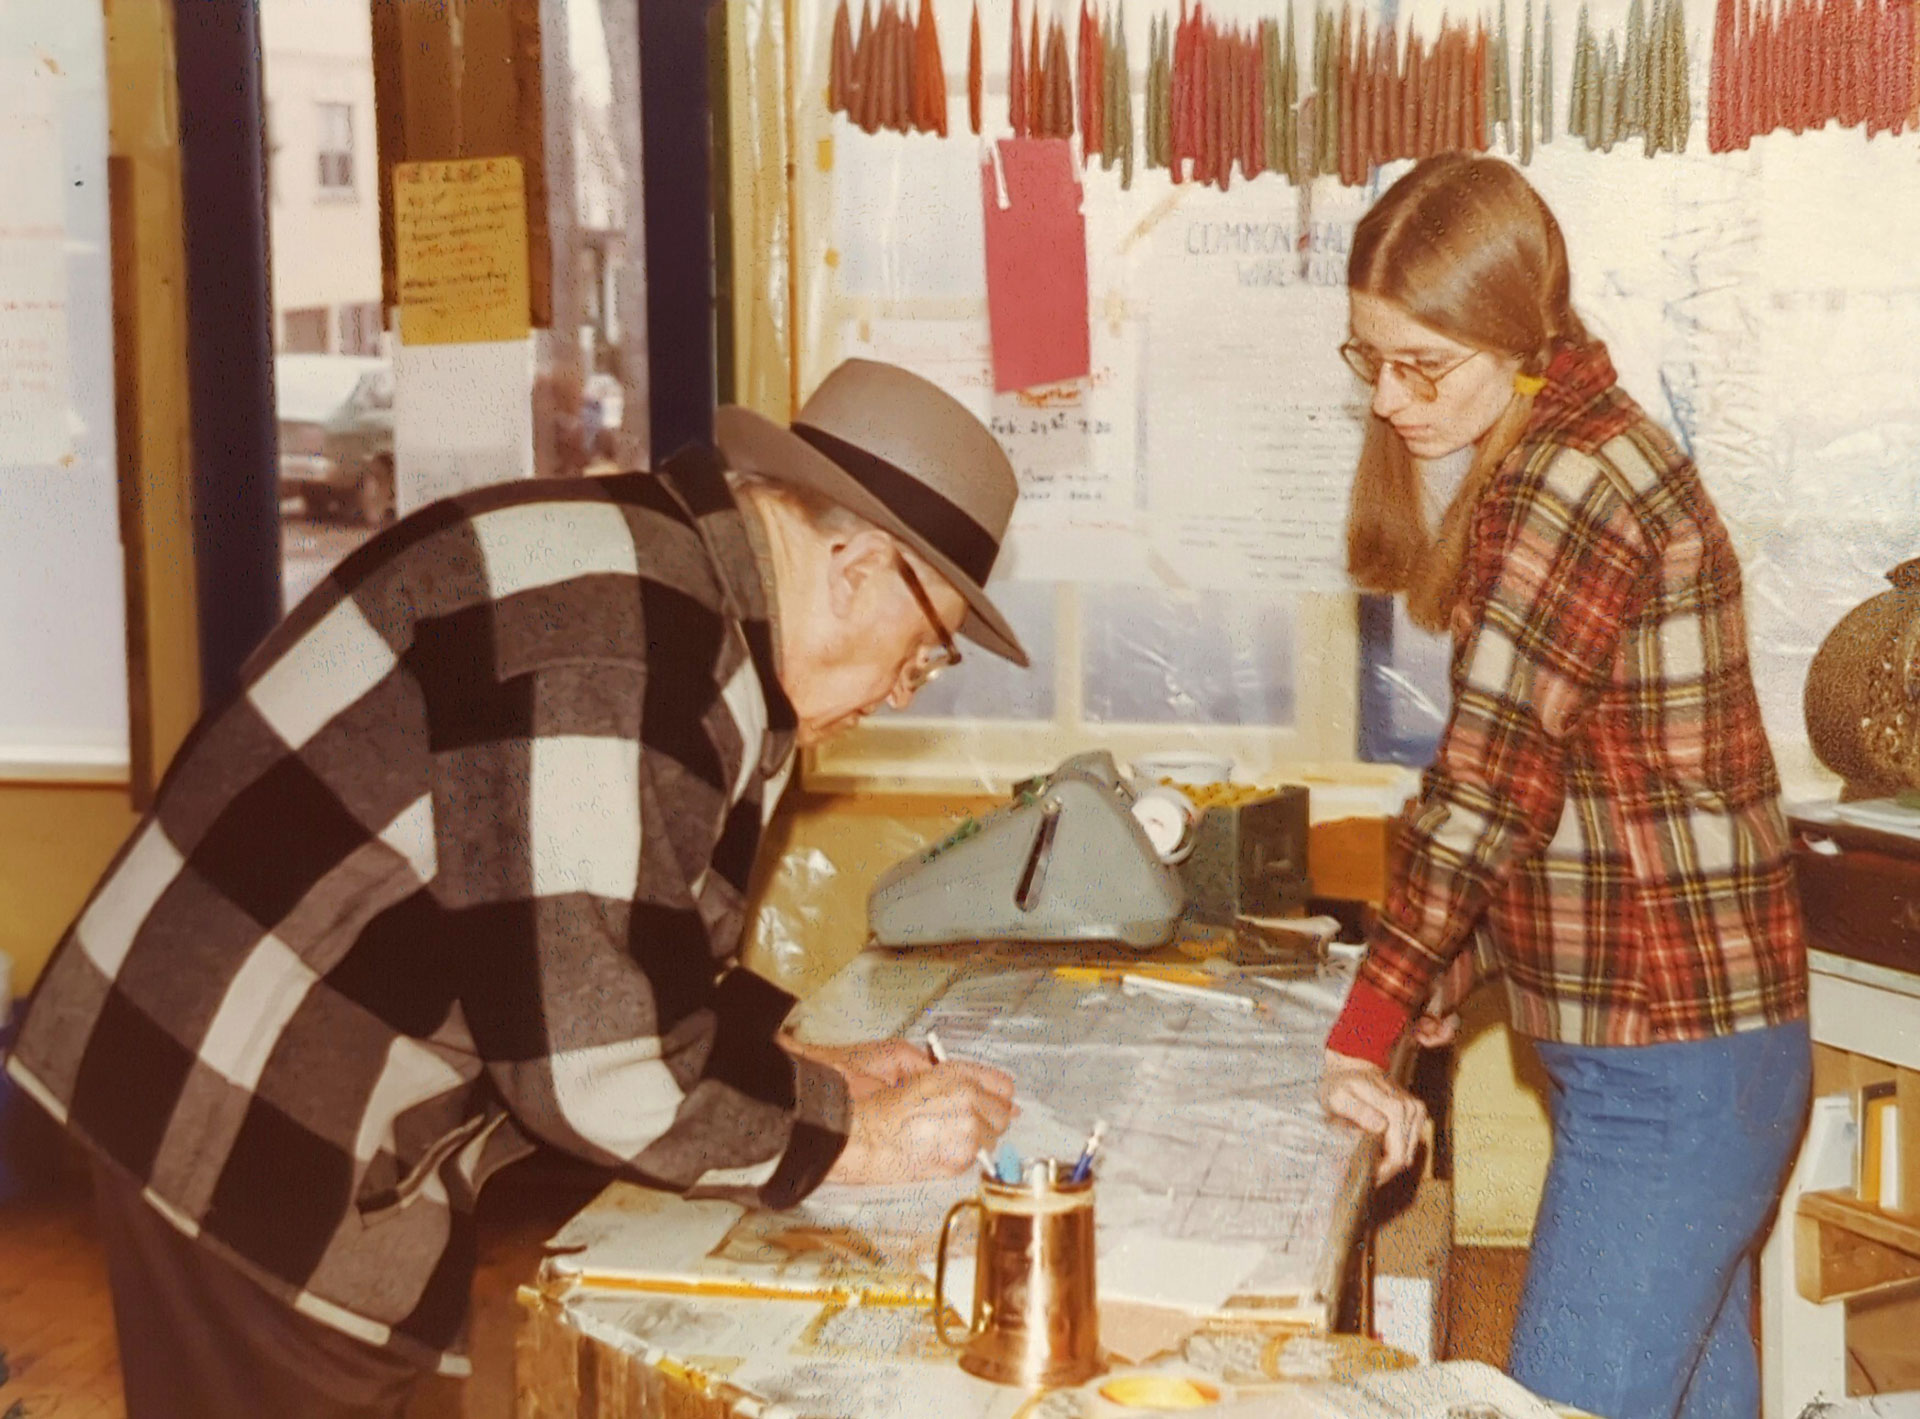 An elderly man in a checkered coat and hat leans over a table studying a document, while a young woman with long hair and glasses, wearing a plaid jacket, stands beside him, also looking at the document. They are in a room with notes pinned on the wall at Whole Foods Coop Duluth MN.